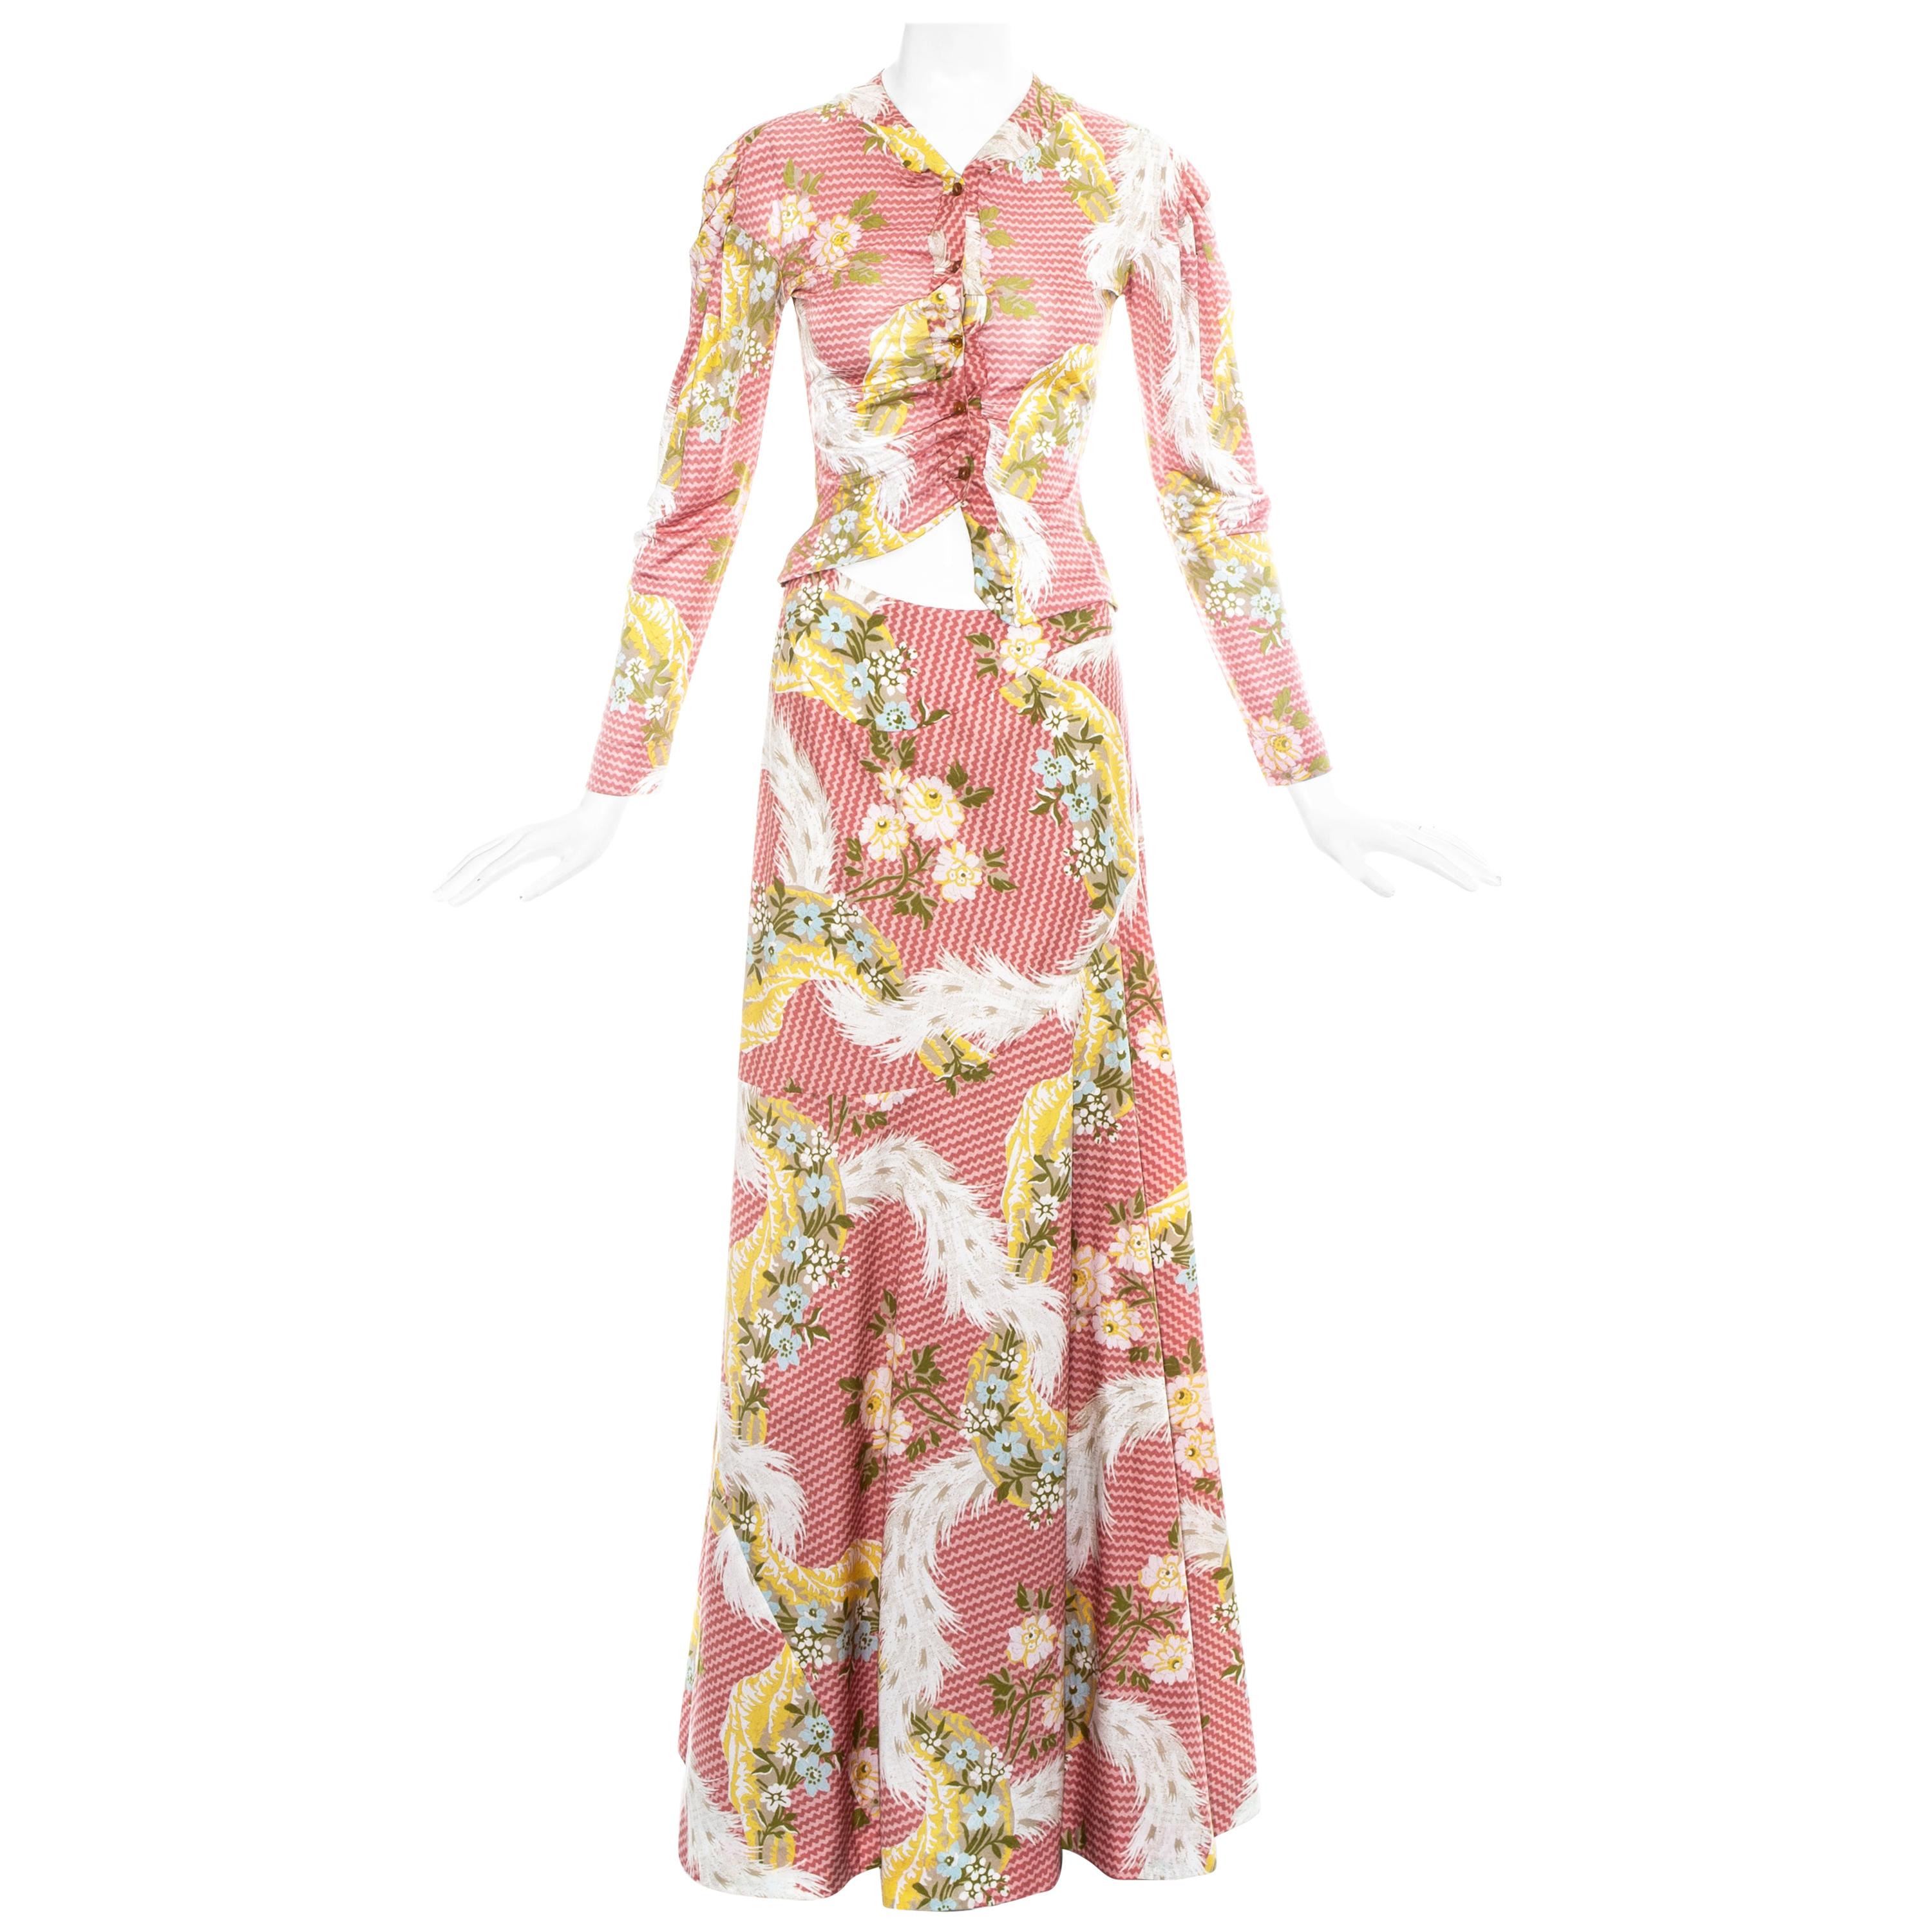 Vivienne Westwood pink floral printed maxi skirt and blouse ensemble, ss 2001